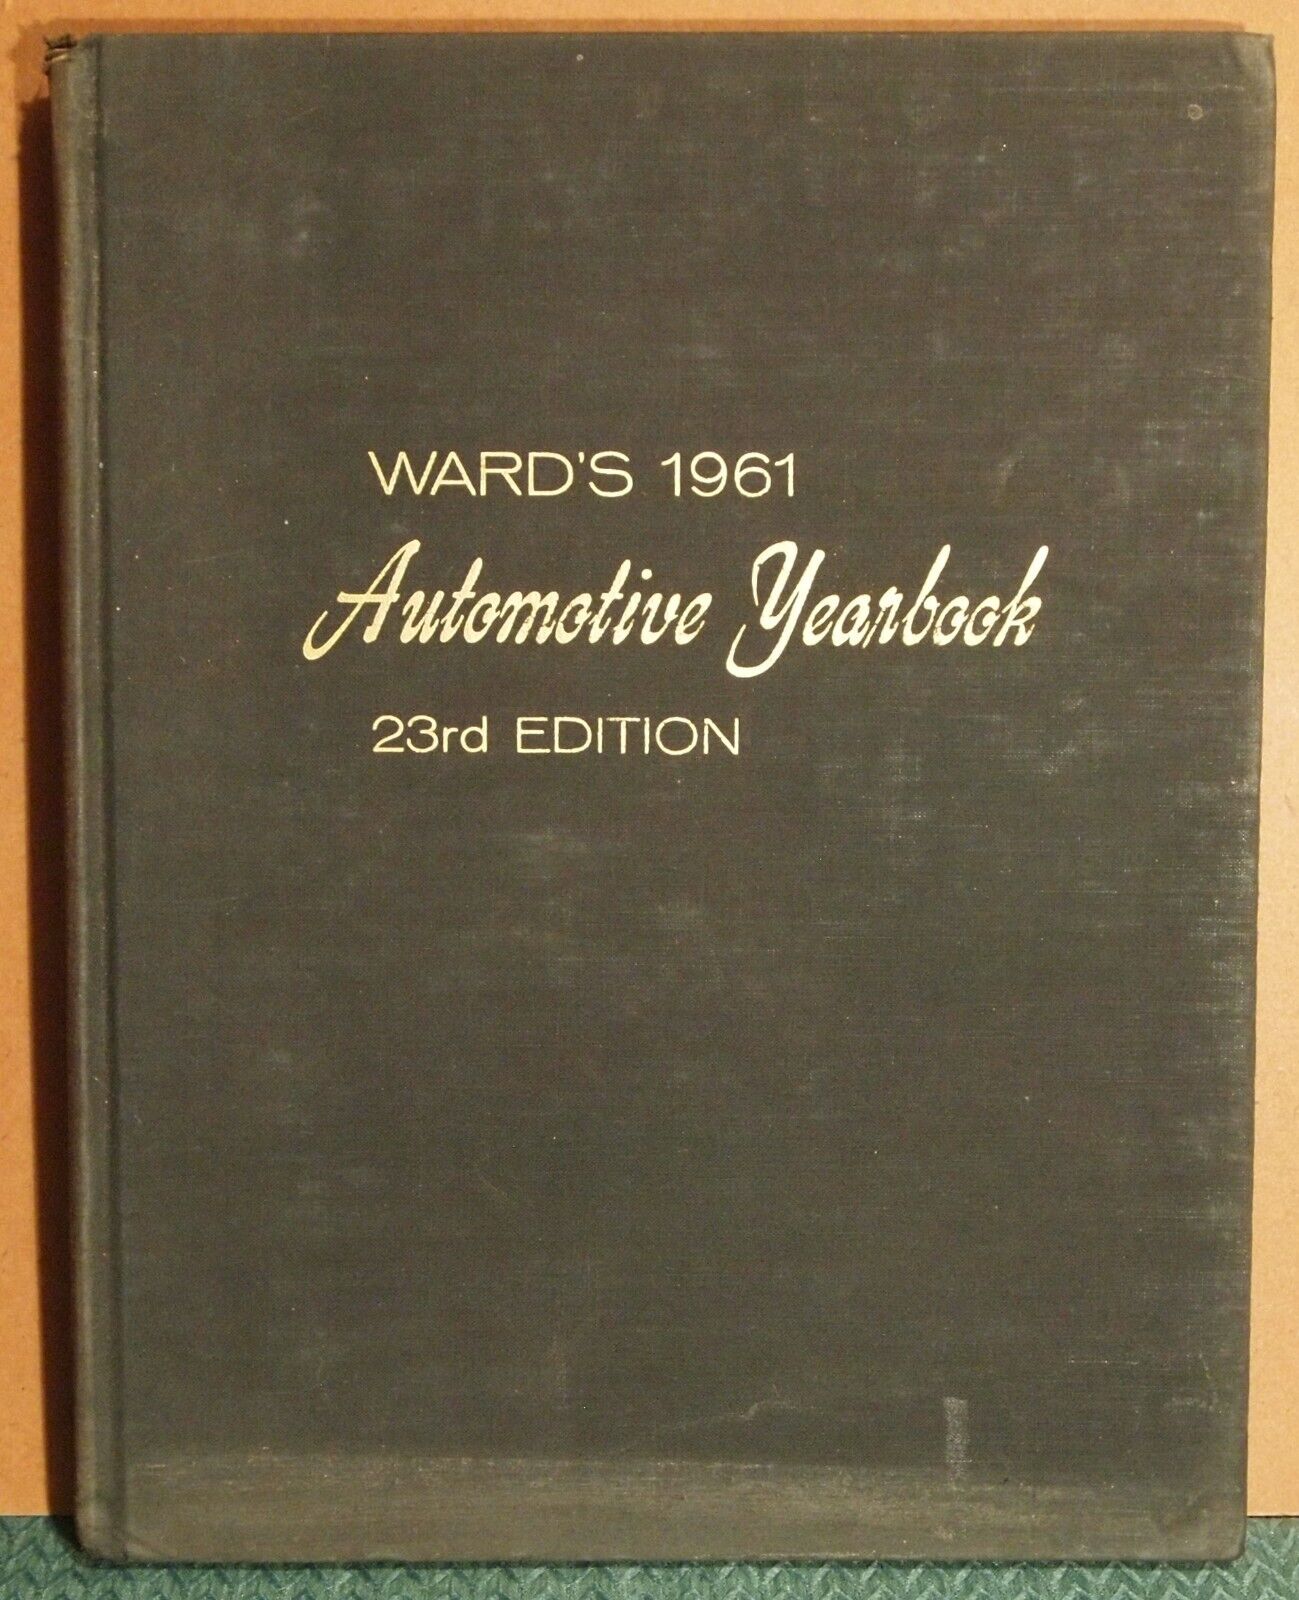 1961 WARD'S AUTOMOTIVE YEARBOOK 23rd edition WARDS-20